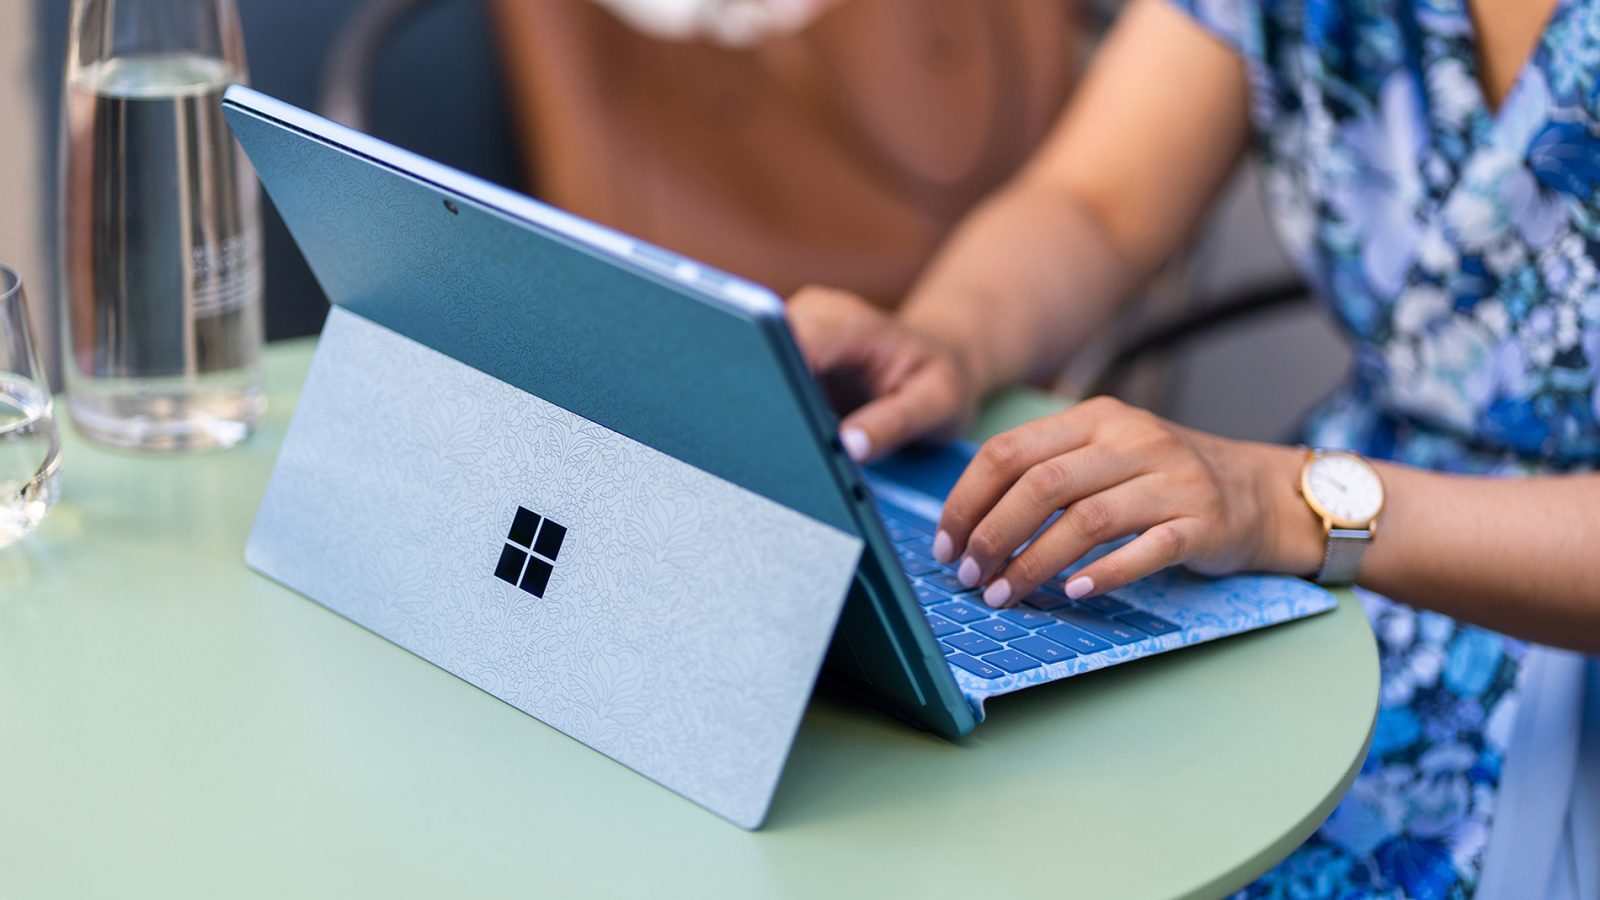 Should you buy a Surface Pro 5 (2020) in 2022?